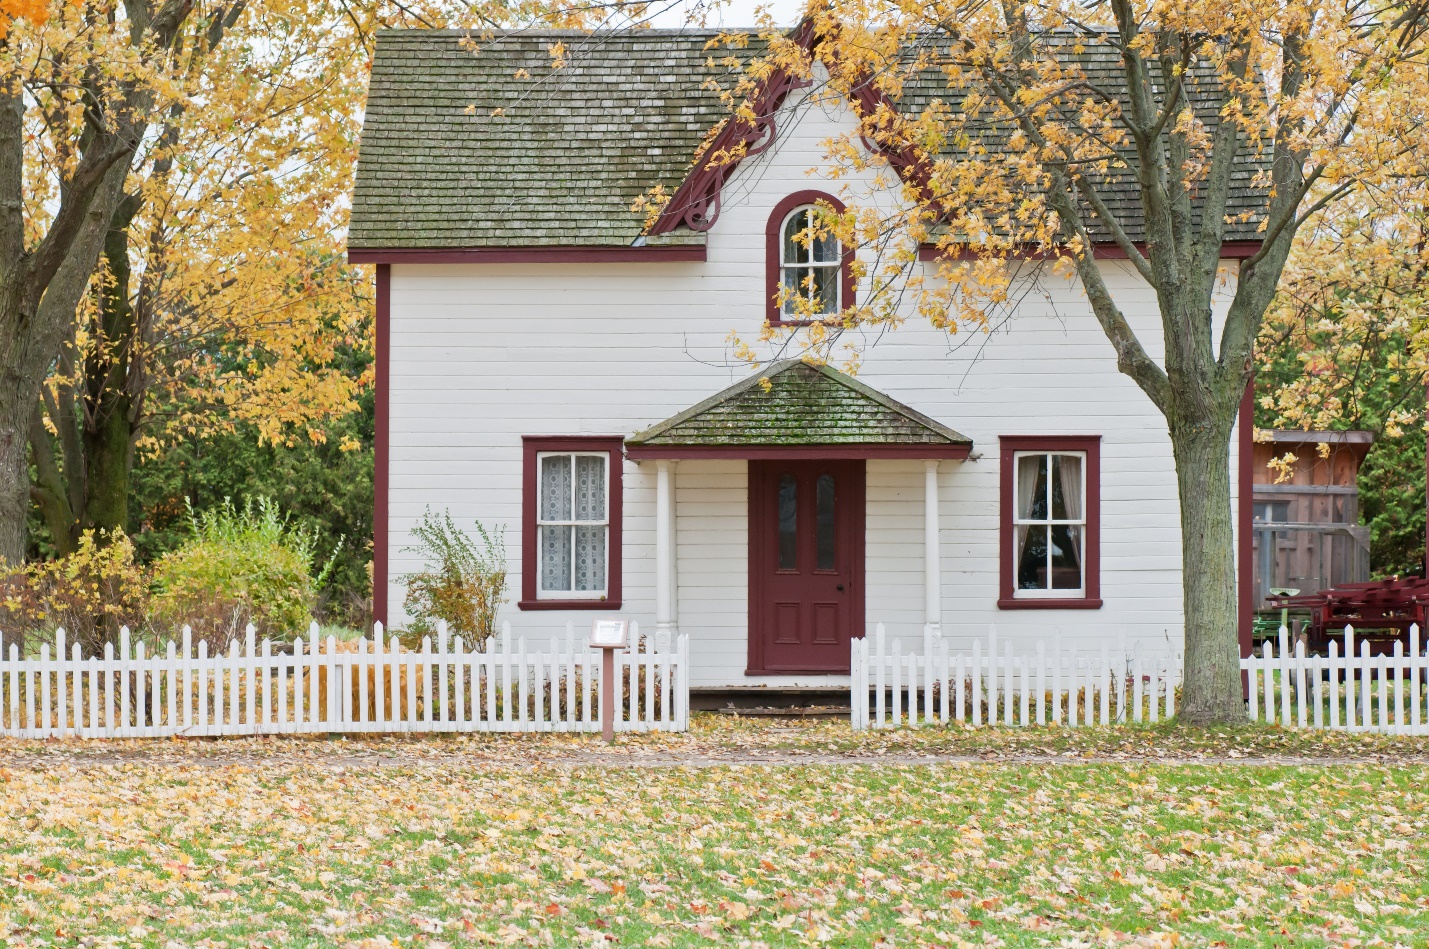 Tips for Keeping Your Home Safe in the Fall.